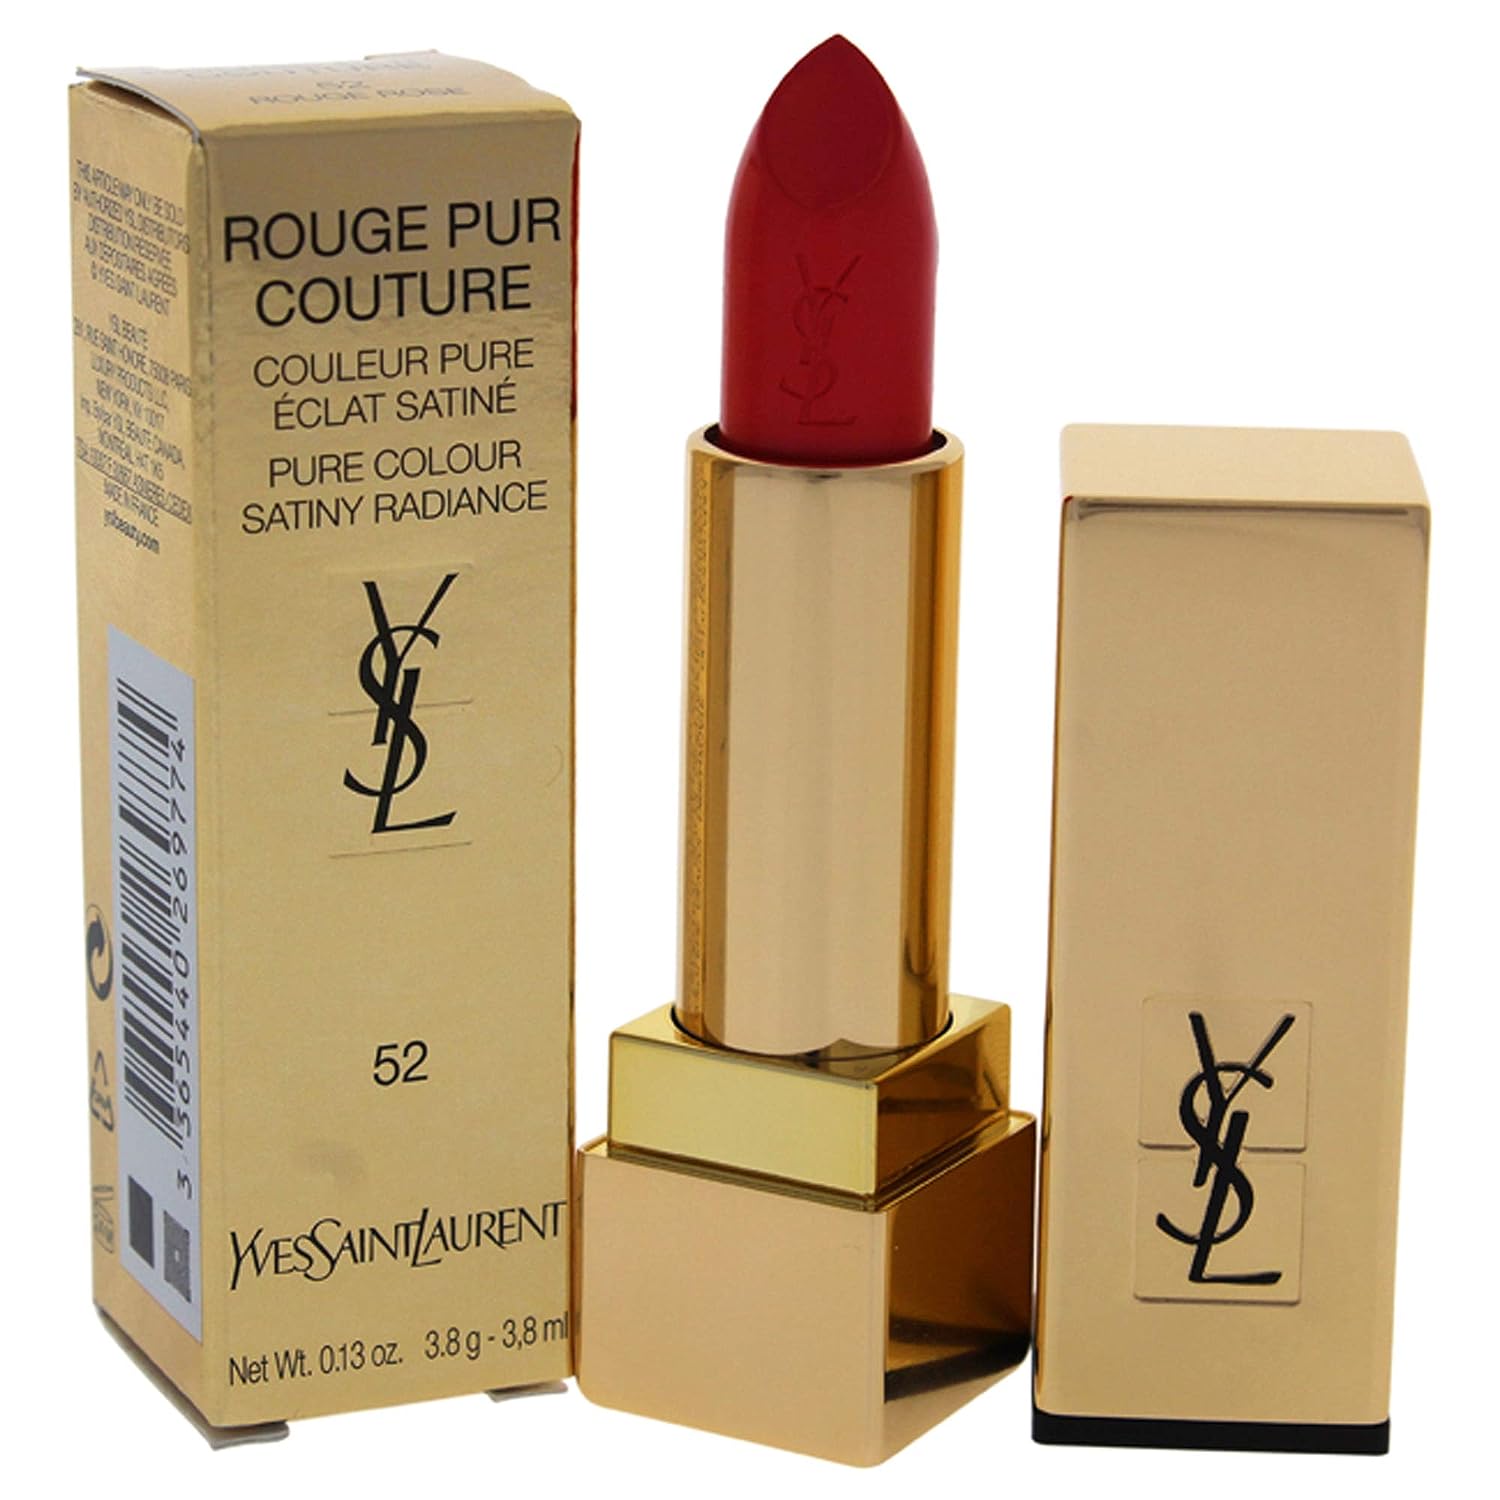 ''Yves SAINT Laurent lipstick Rouge Pur Couture, No.52 Rosy Coral, 0.13 Ounce,C-YS-291-01''